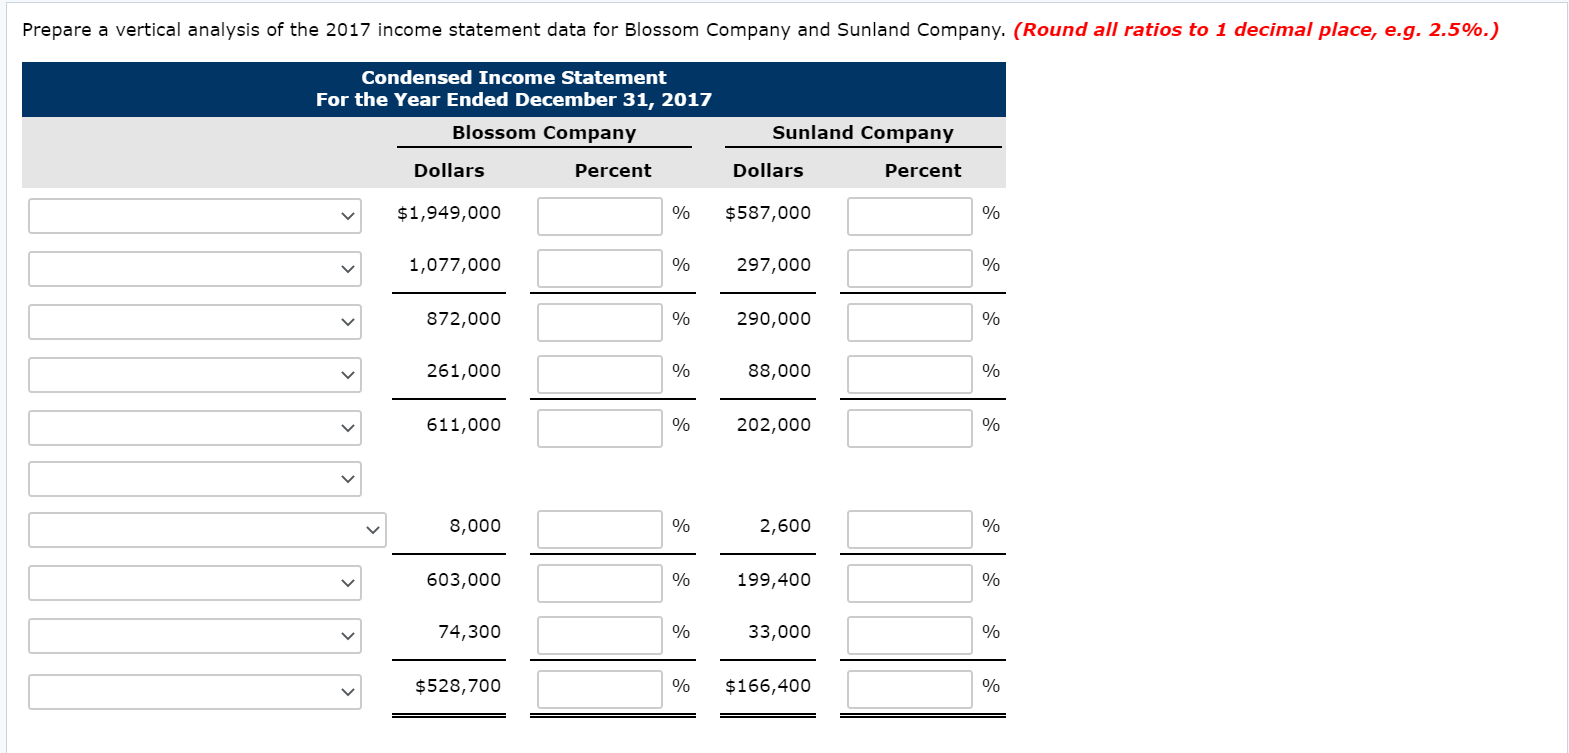 Prepare a vertical analysis of the 2017 income statement data for Blossom Company and Sunland Company. (Round all ratios to 1 decimal place, e.g. 2.5%.)
Condensed Income Statement
For the Year Ended December 31, 2017
Blossom Company
Sunland Company
Dollars
Percent
Dollars
Percent
$1,949,000
%
$587,000
%
1,077,000
%
297,000
%
872,000
%
290,000
261,000
%
88,000
%
611,000
%
202,000
%
8,000
%
2,600
603,000
%
199,400
%
74,300
%
33,000
%
$528,700
%
$166,400
